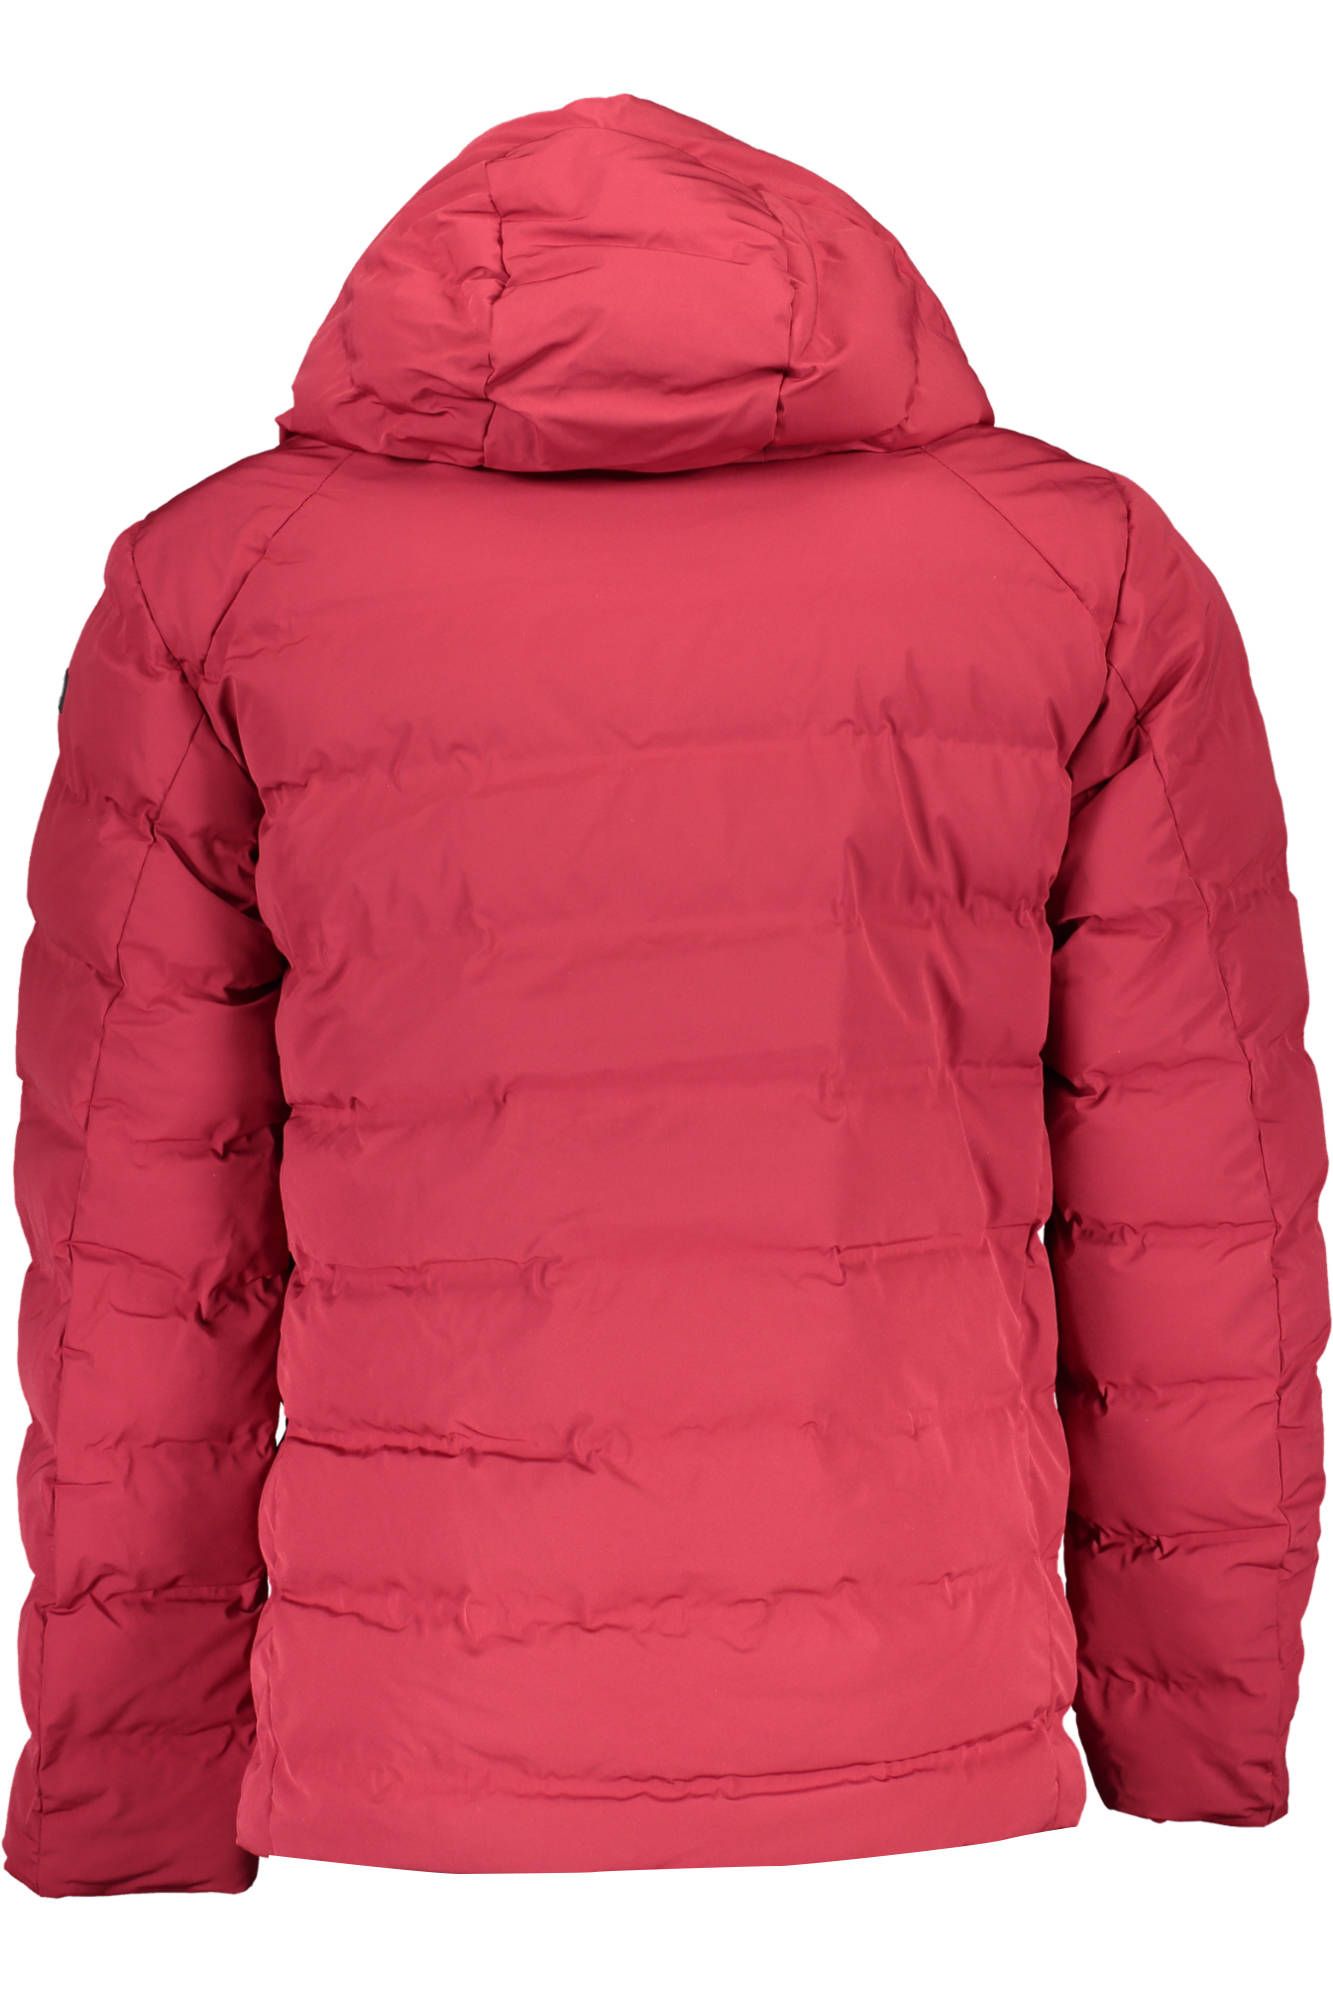 U.S. POLO ASSN. Chic Pink Hooded Jacket with Contrasting Details